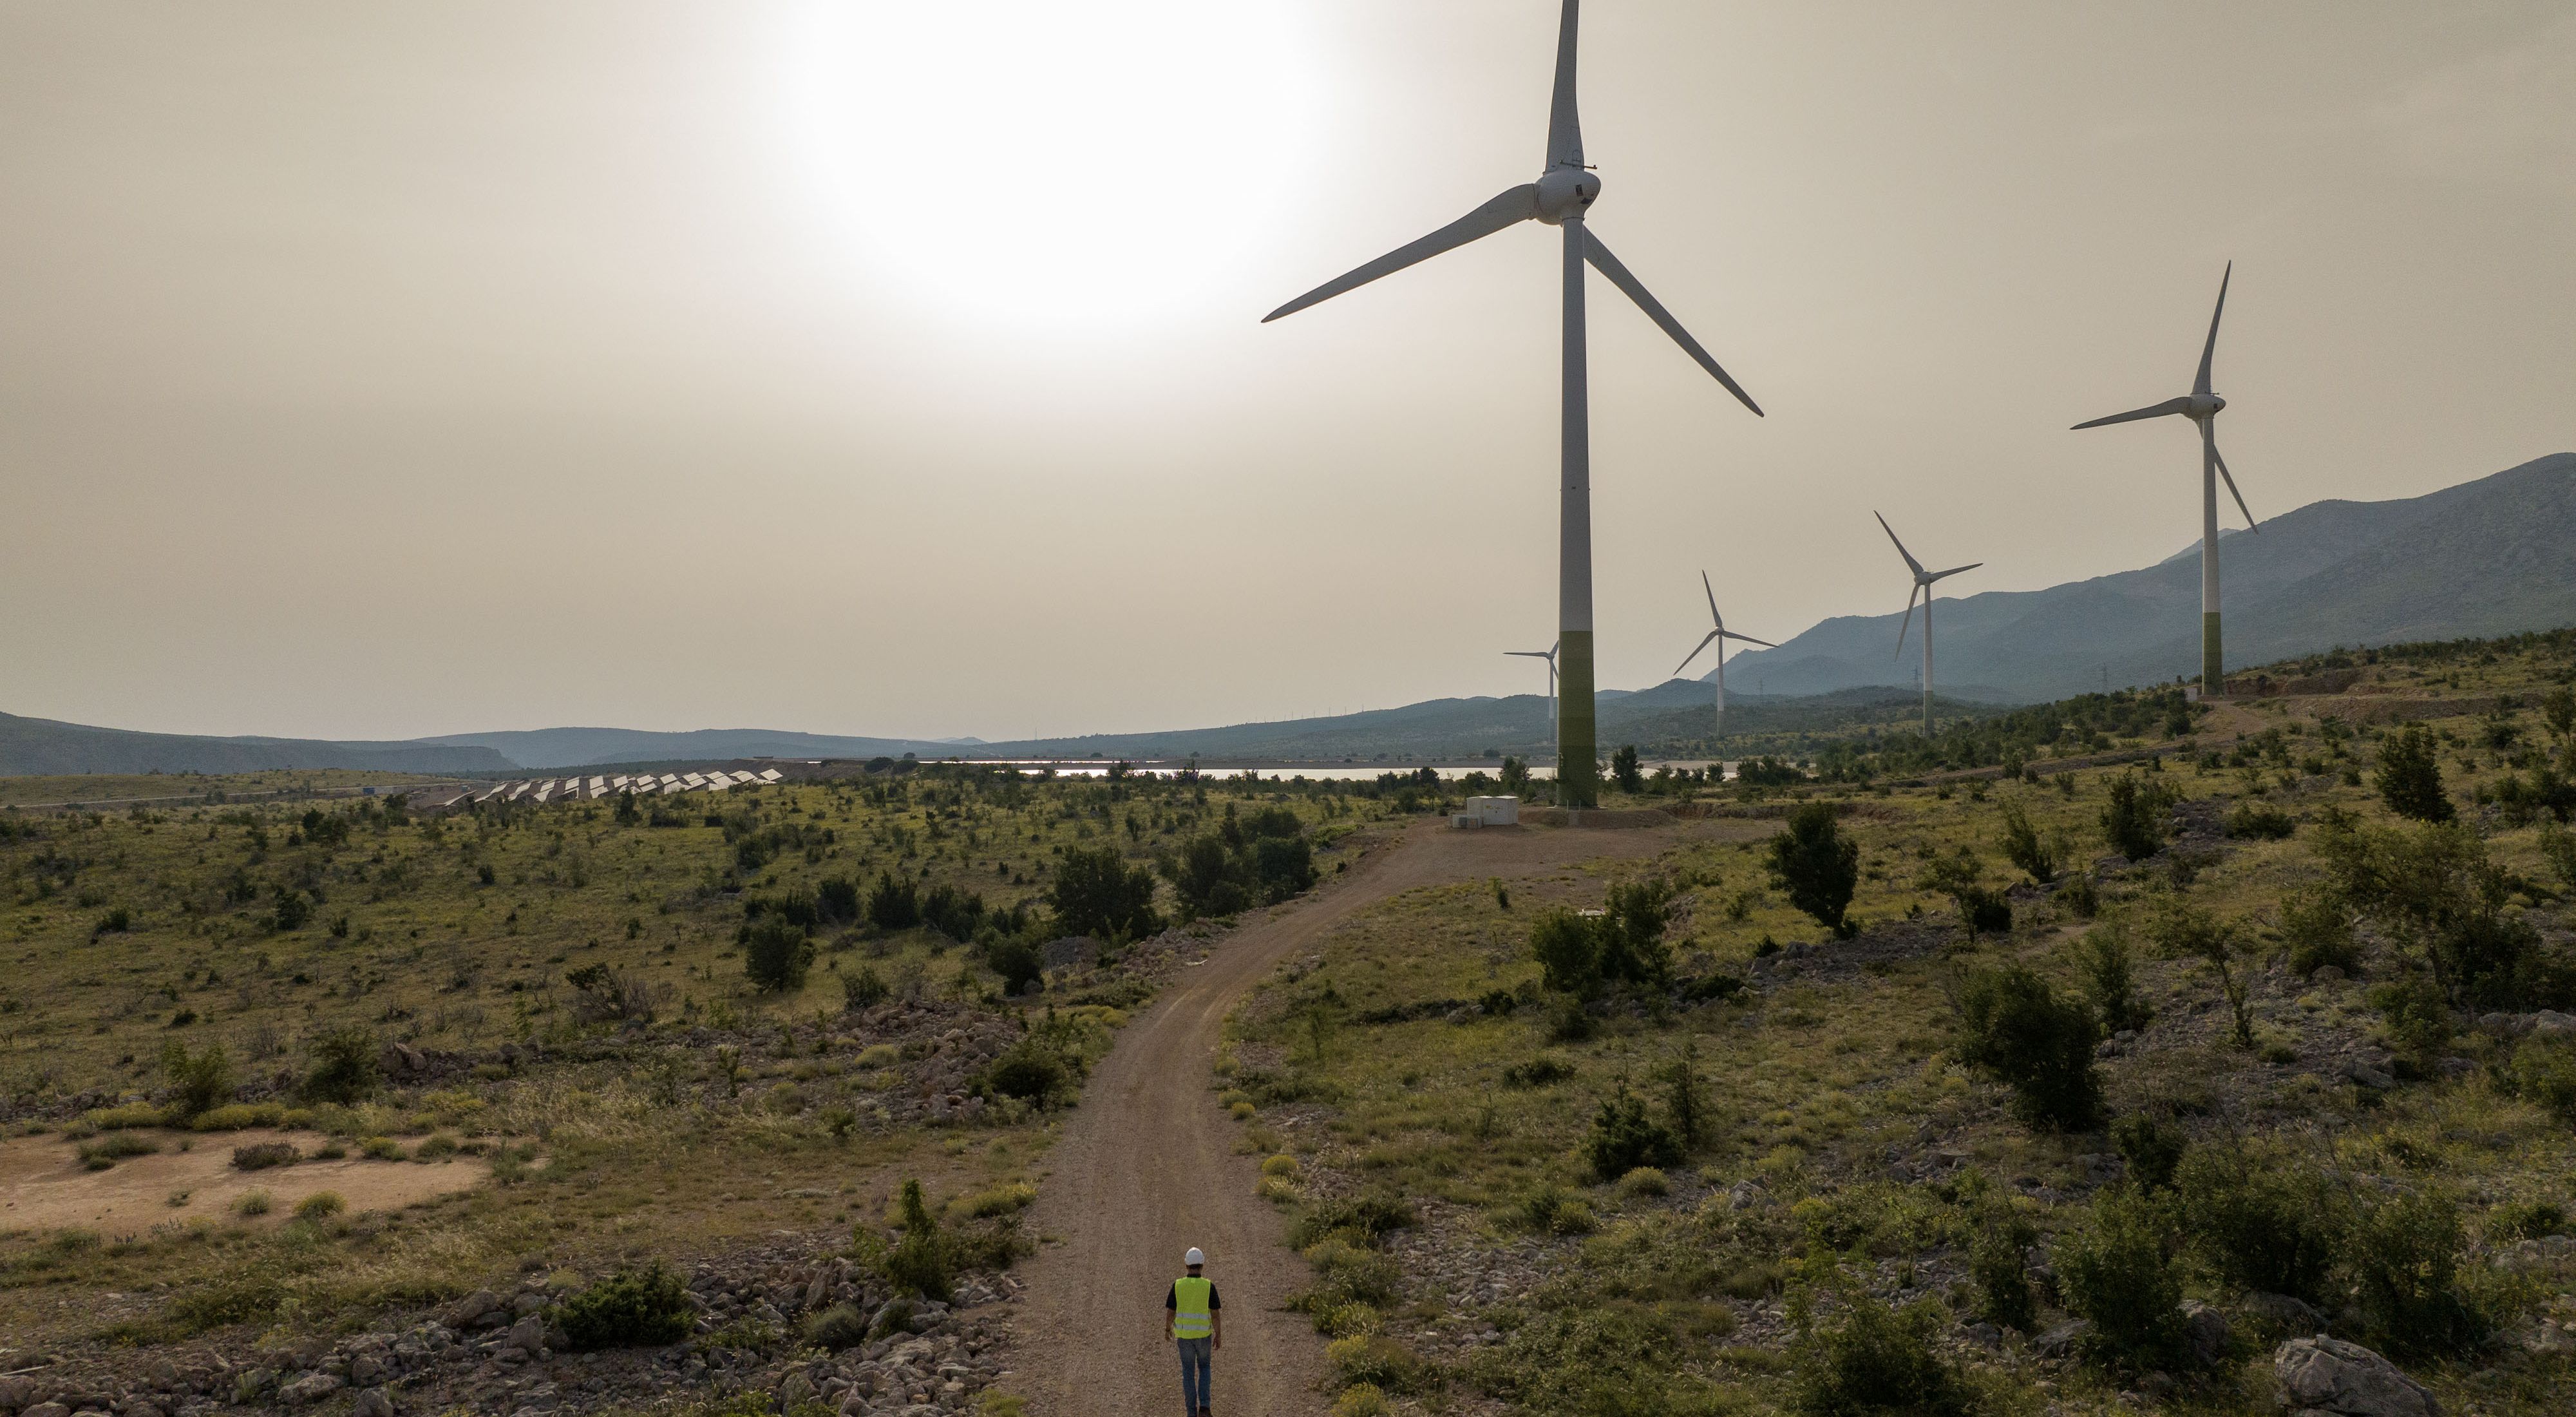 The Jasenice wind farm lies next to Croatia's Zrmanja river - offering the country an energy path that is both renewable and nature-positive